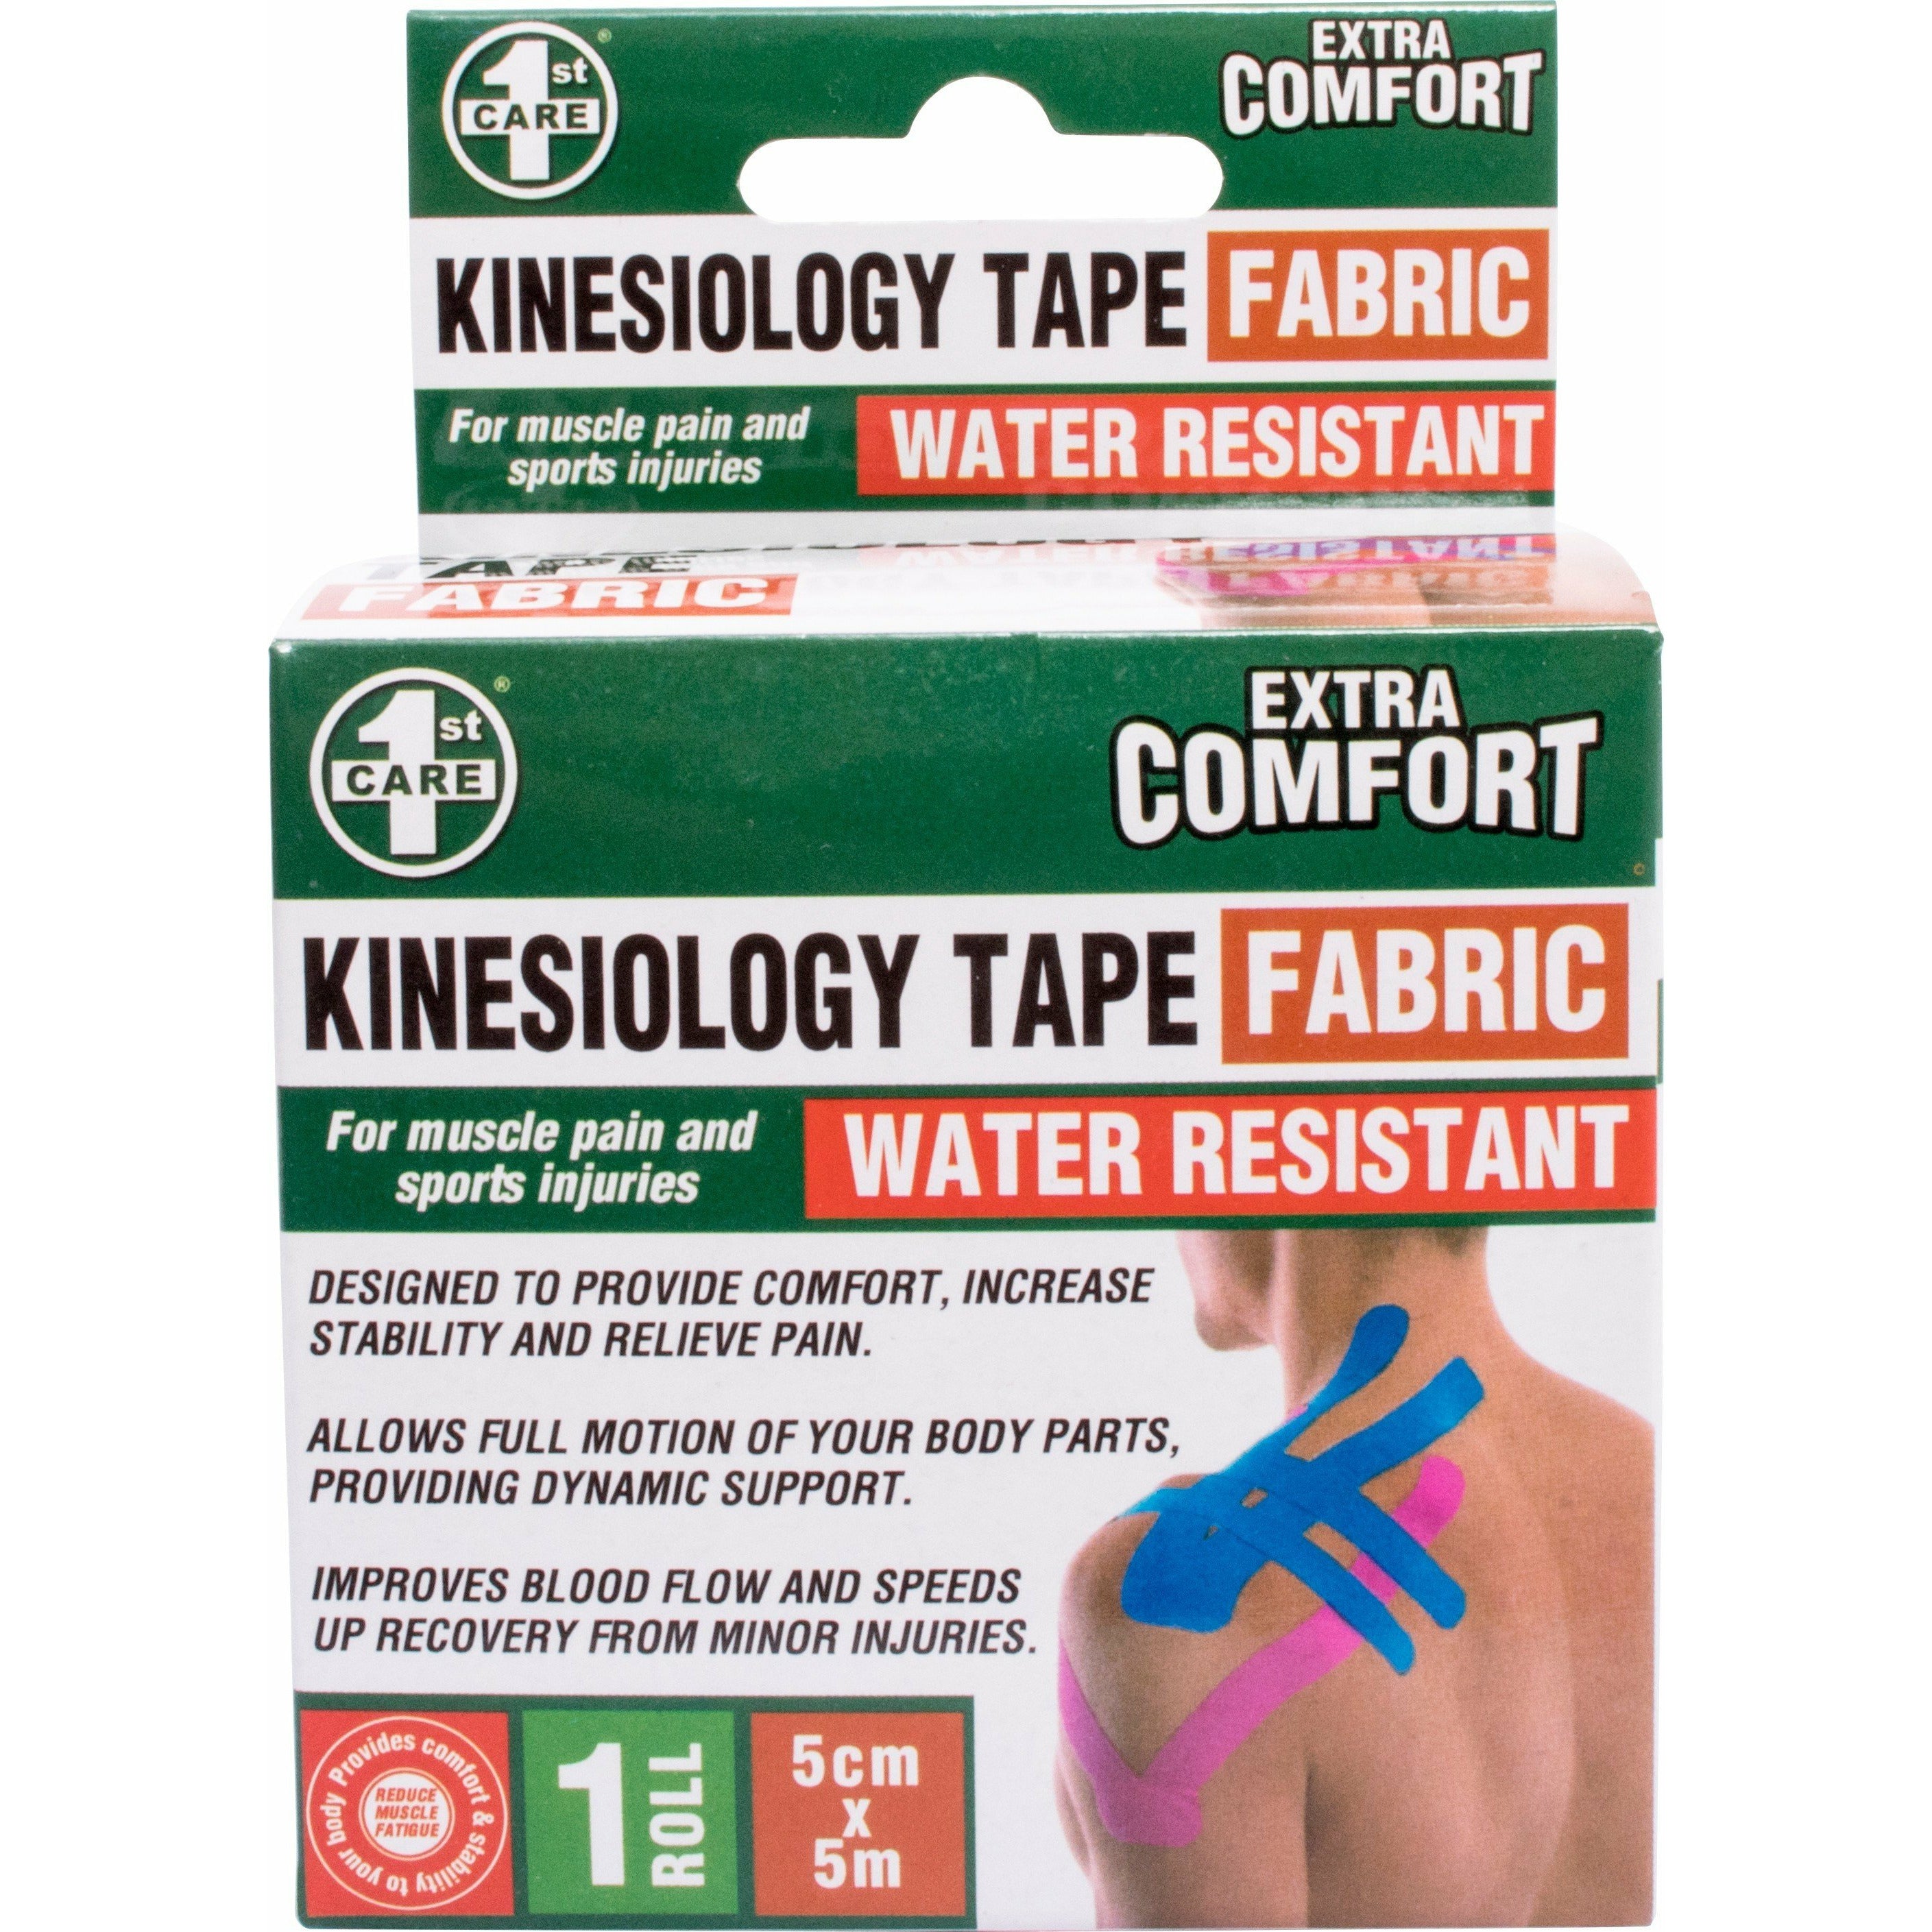 Kinesiology Tape Fabric Water Resistant - 5x5cm 1 Roll Default Title